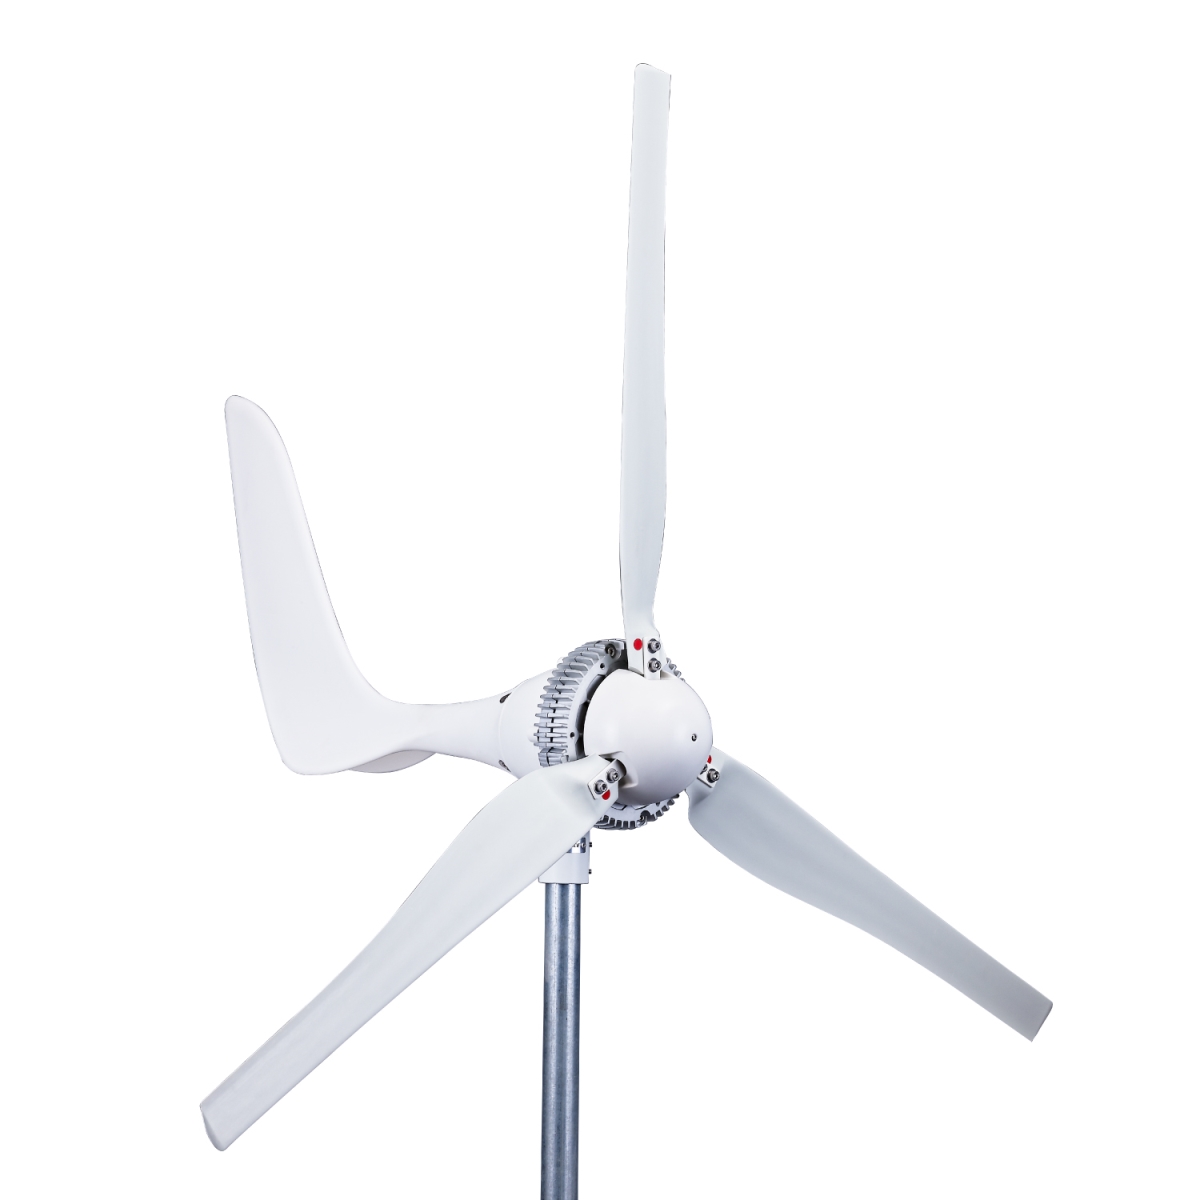 Picture of Automaxx Windmill UB1500S124 1500W 24V 60A Wind Turbine Generator kit with Bluetooth Controll  Additional Spare Blade Set.